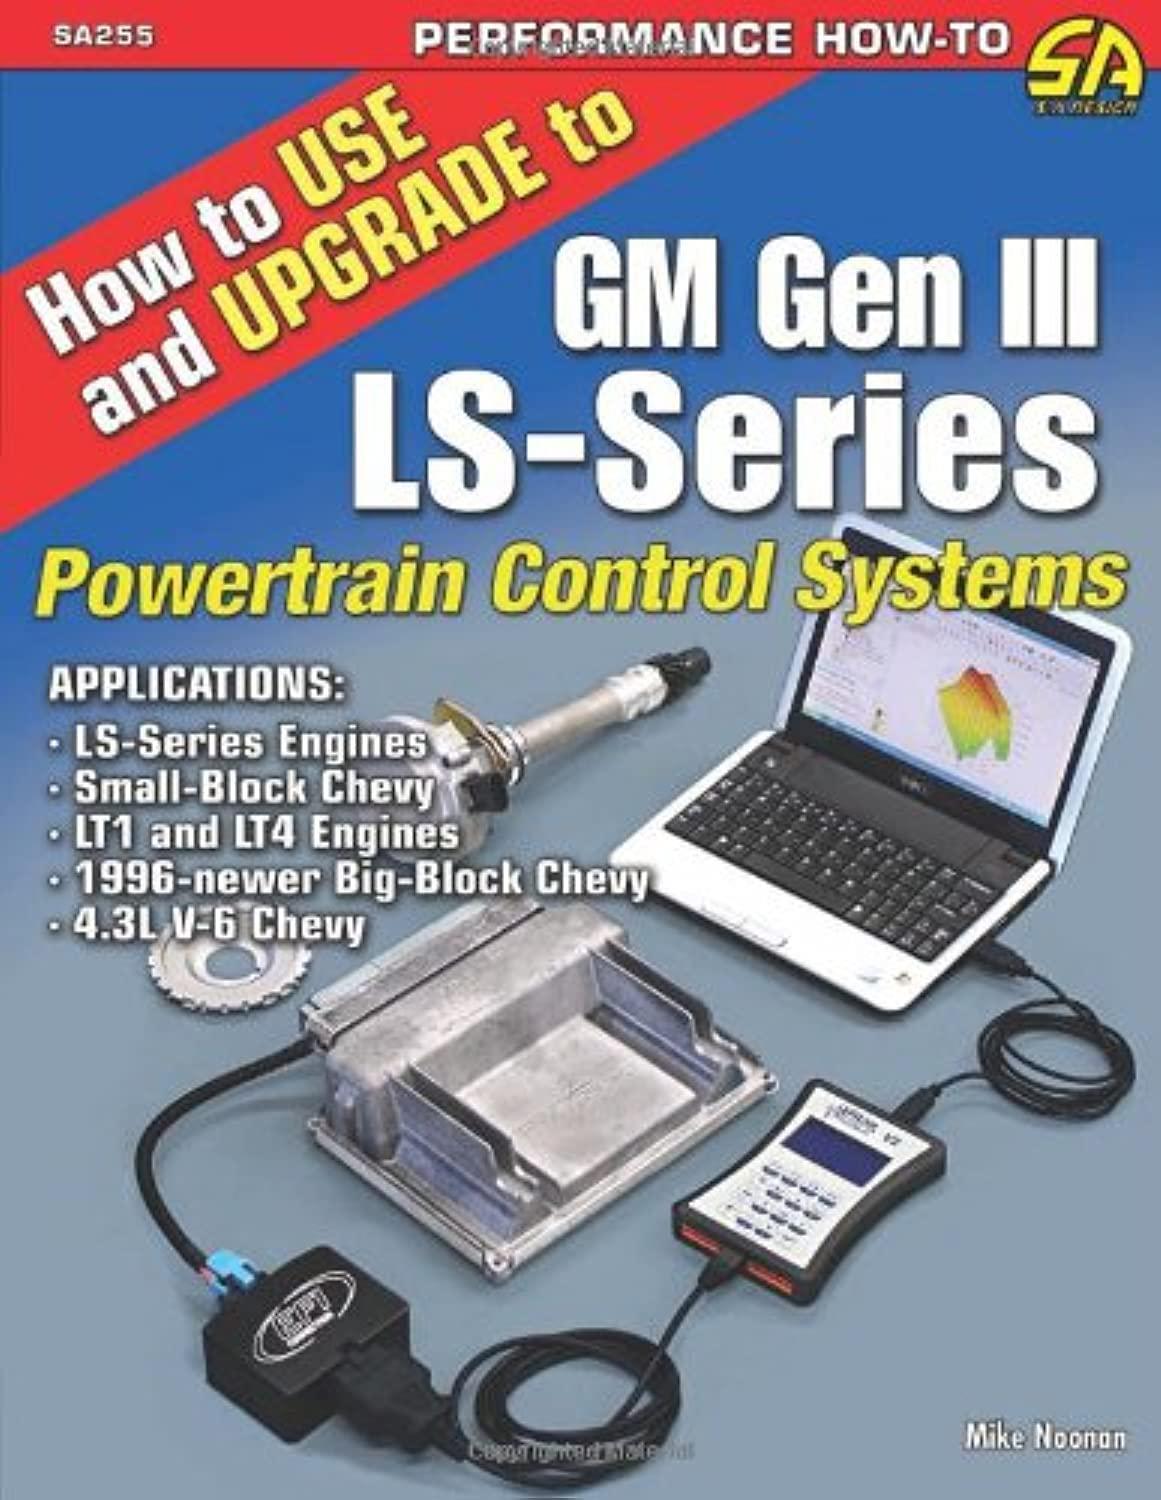 how to use and upgrade to gm gen iii ls series powertrain control systems 1st edition mike noonan 161325055x,